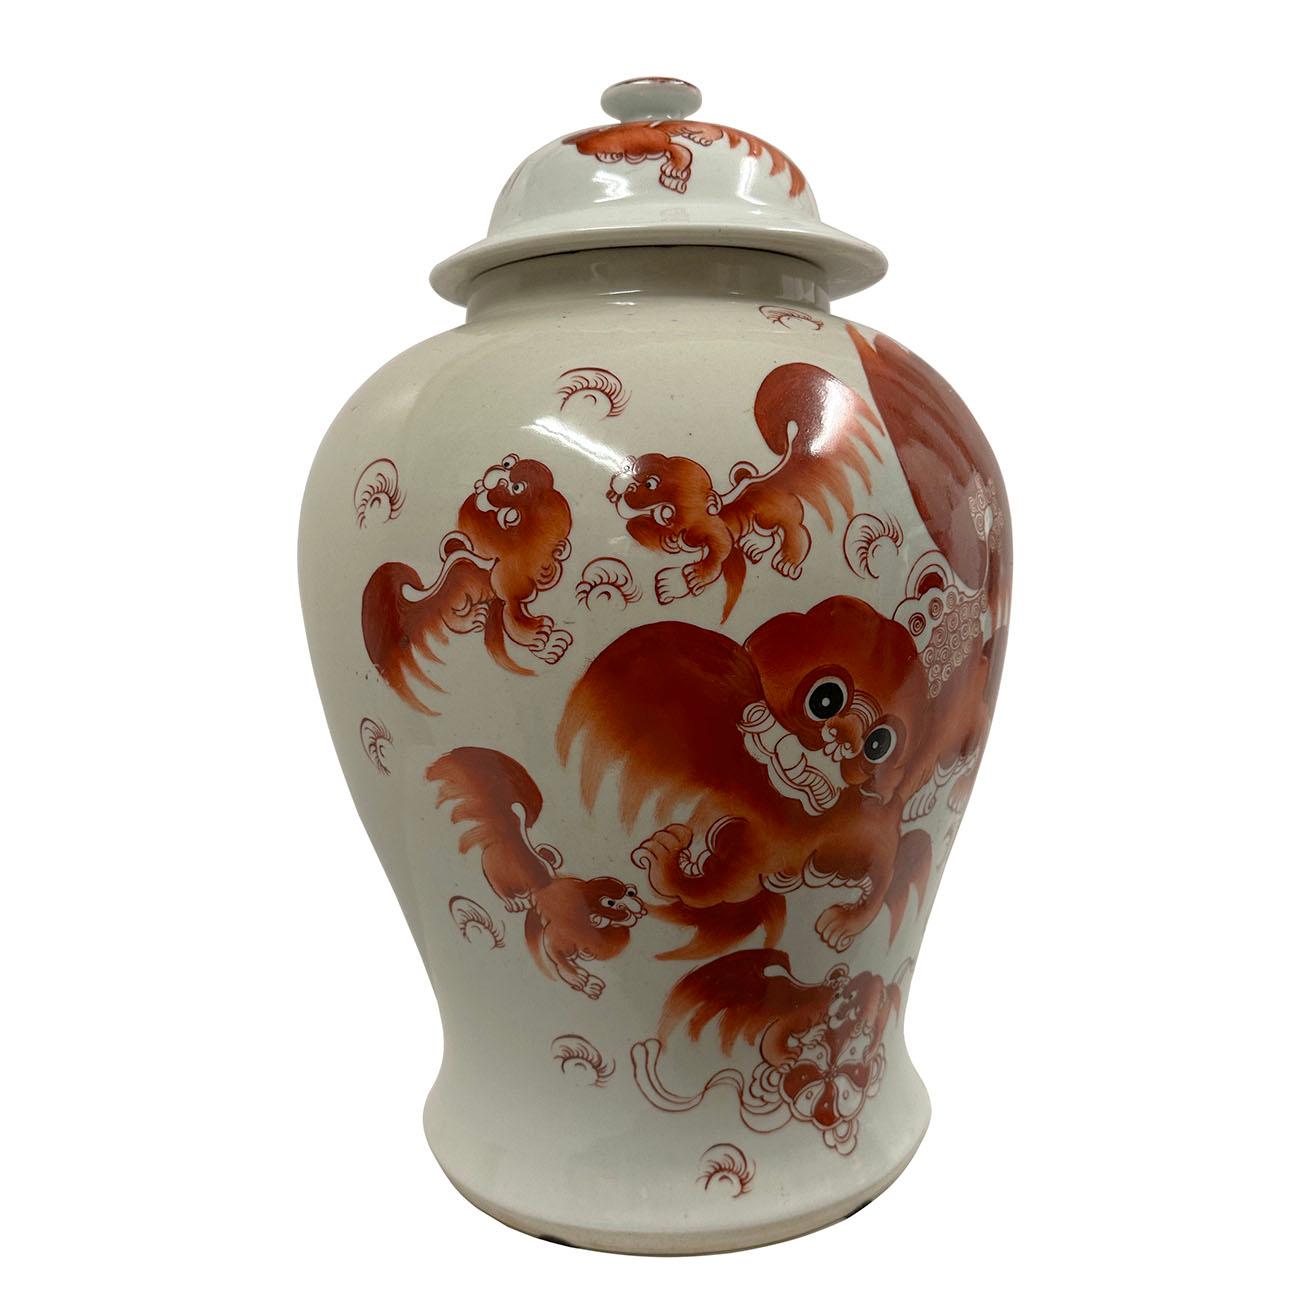 This magnificent Antique Chinese Famille-Rose porcelain Ginger Jar was 100% hand made and hand paint from famous Chinese Famille-Rose Porcelain. It has beautiful hand painted foo dogs playing on the jar and lid. You can see from the pictures that it